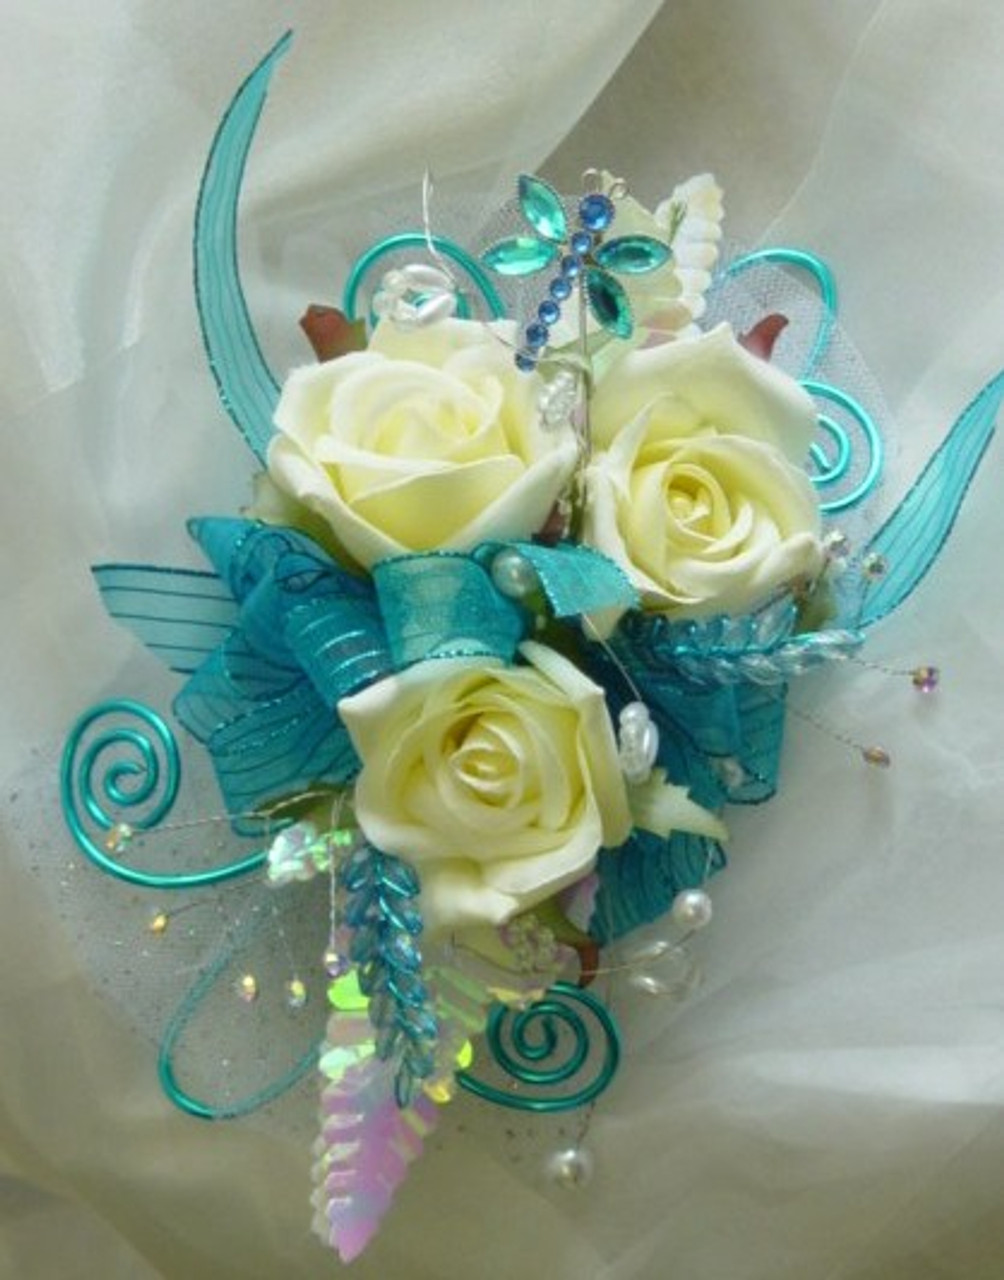 Turquoise Rose Corsage or Boutonniere